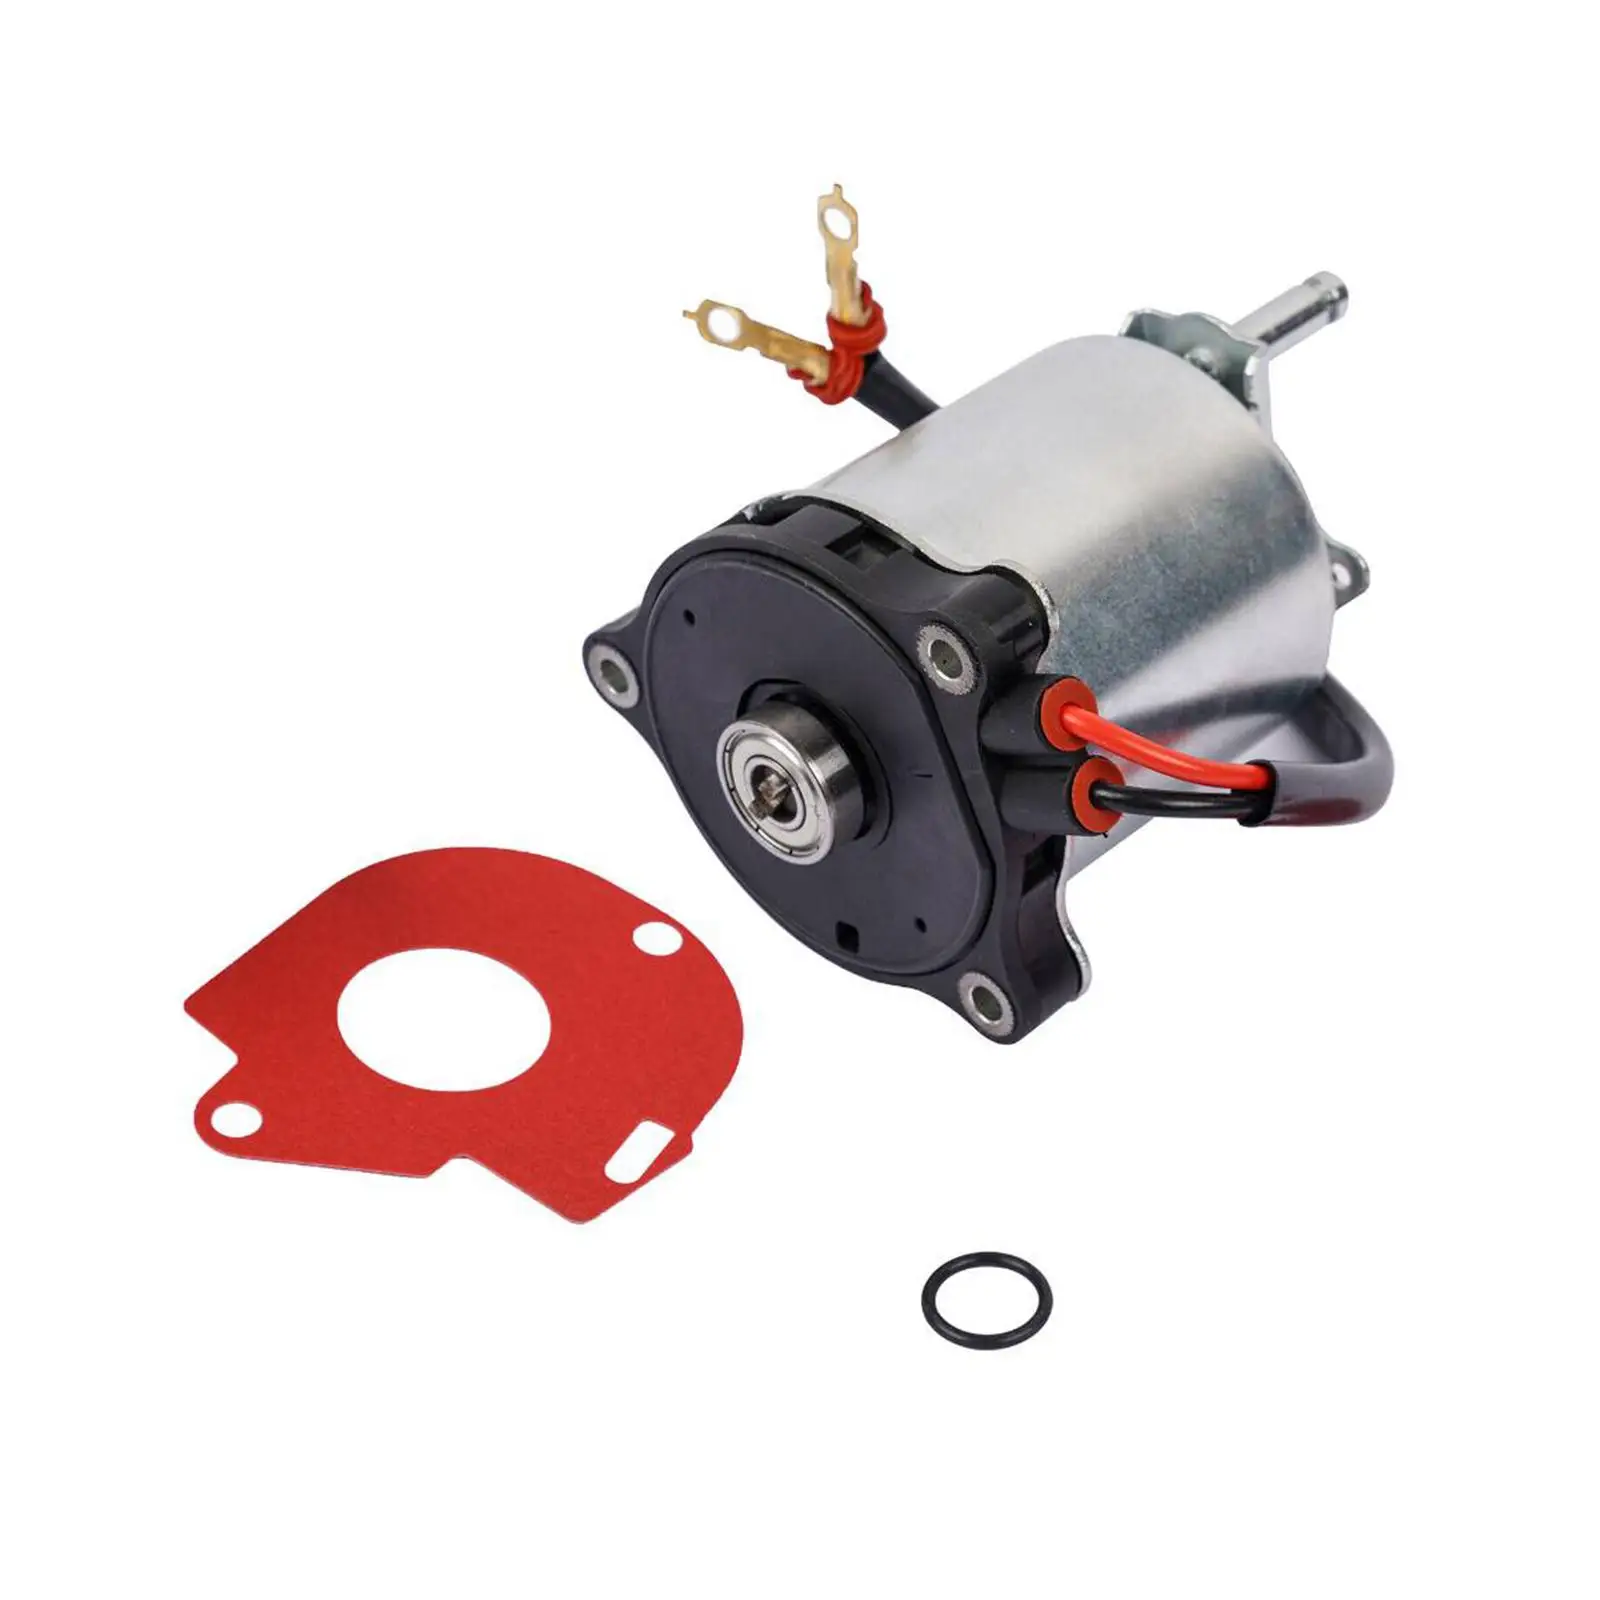 Brake Booster Pump Motor Replace Parts 47960 60050 Accessories Easy to Install High Quality for Gx470 LX450D Gx460 LX570